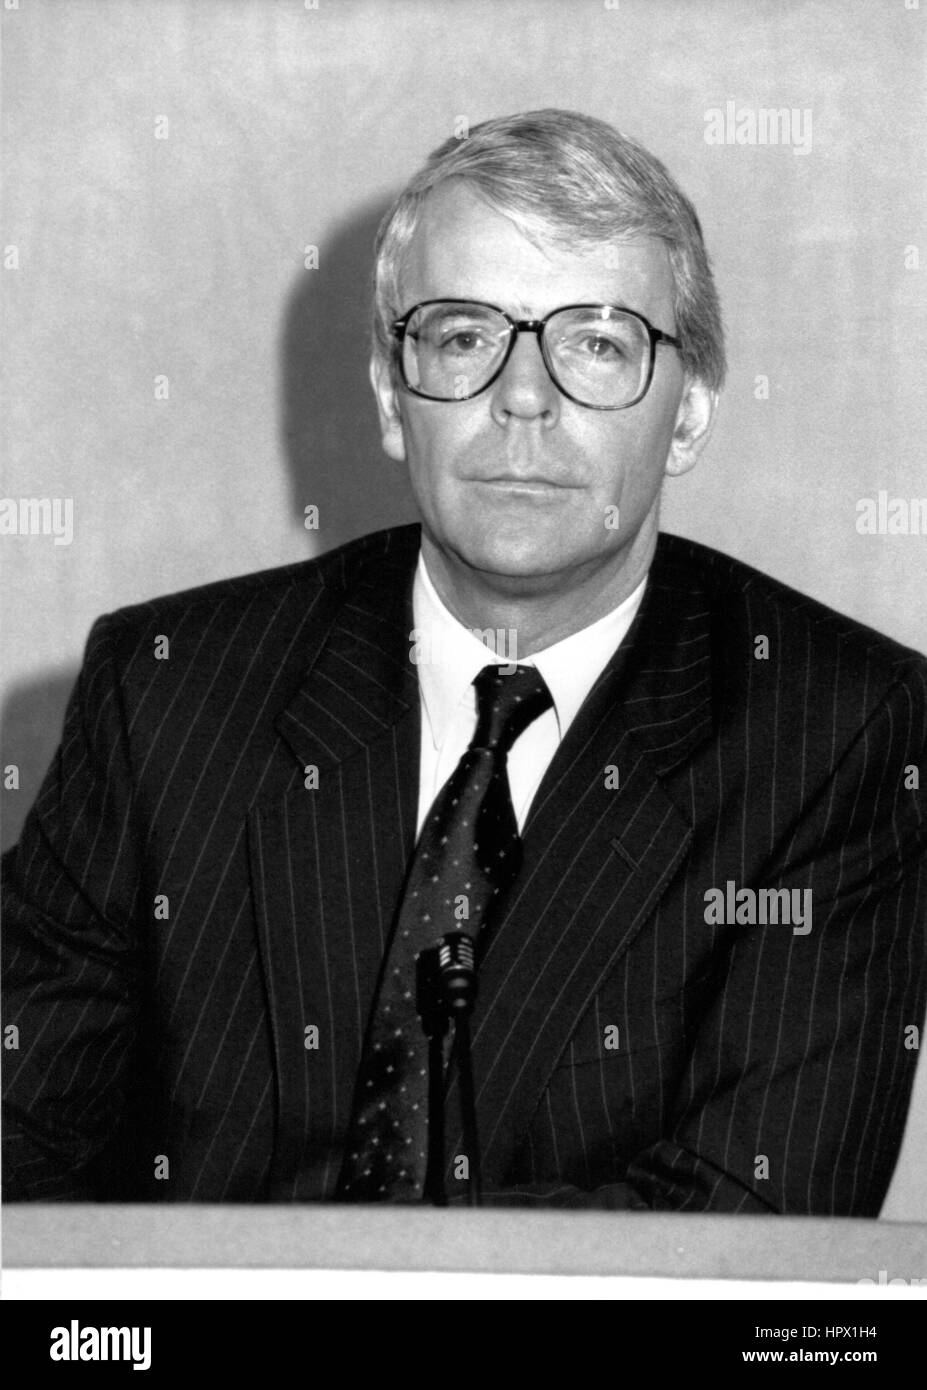 Rt. Hon. John Major, British Prime Minister, attends a press conference in London, England on March 20, 1992. Stock Photo